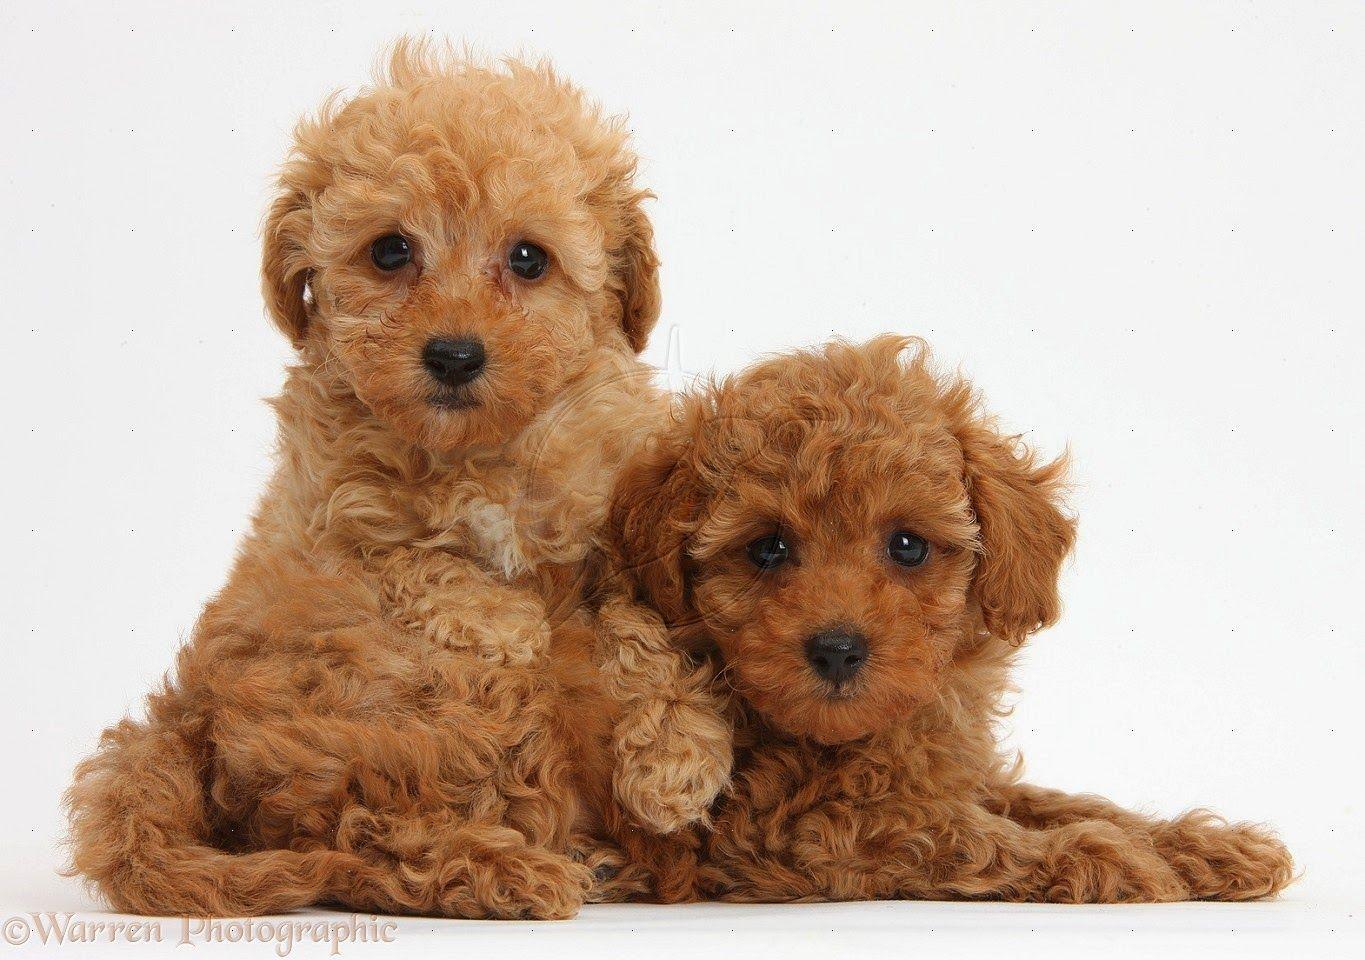 Rules of the Jungle: Poodle puppies